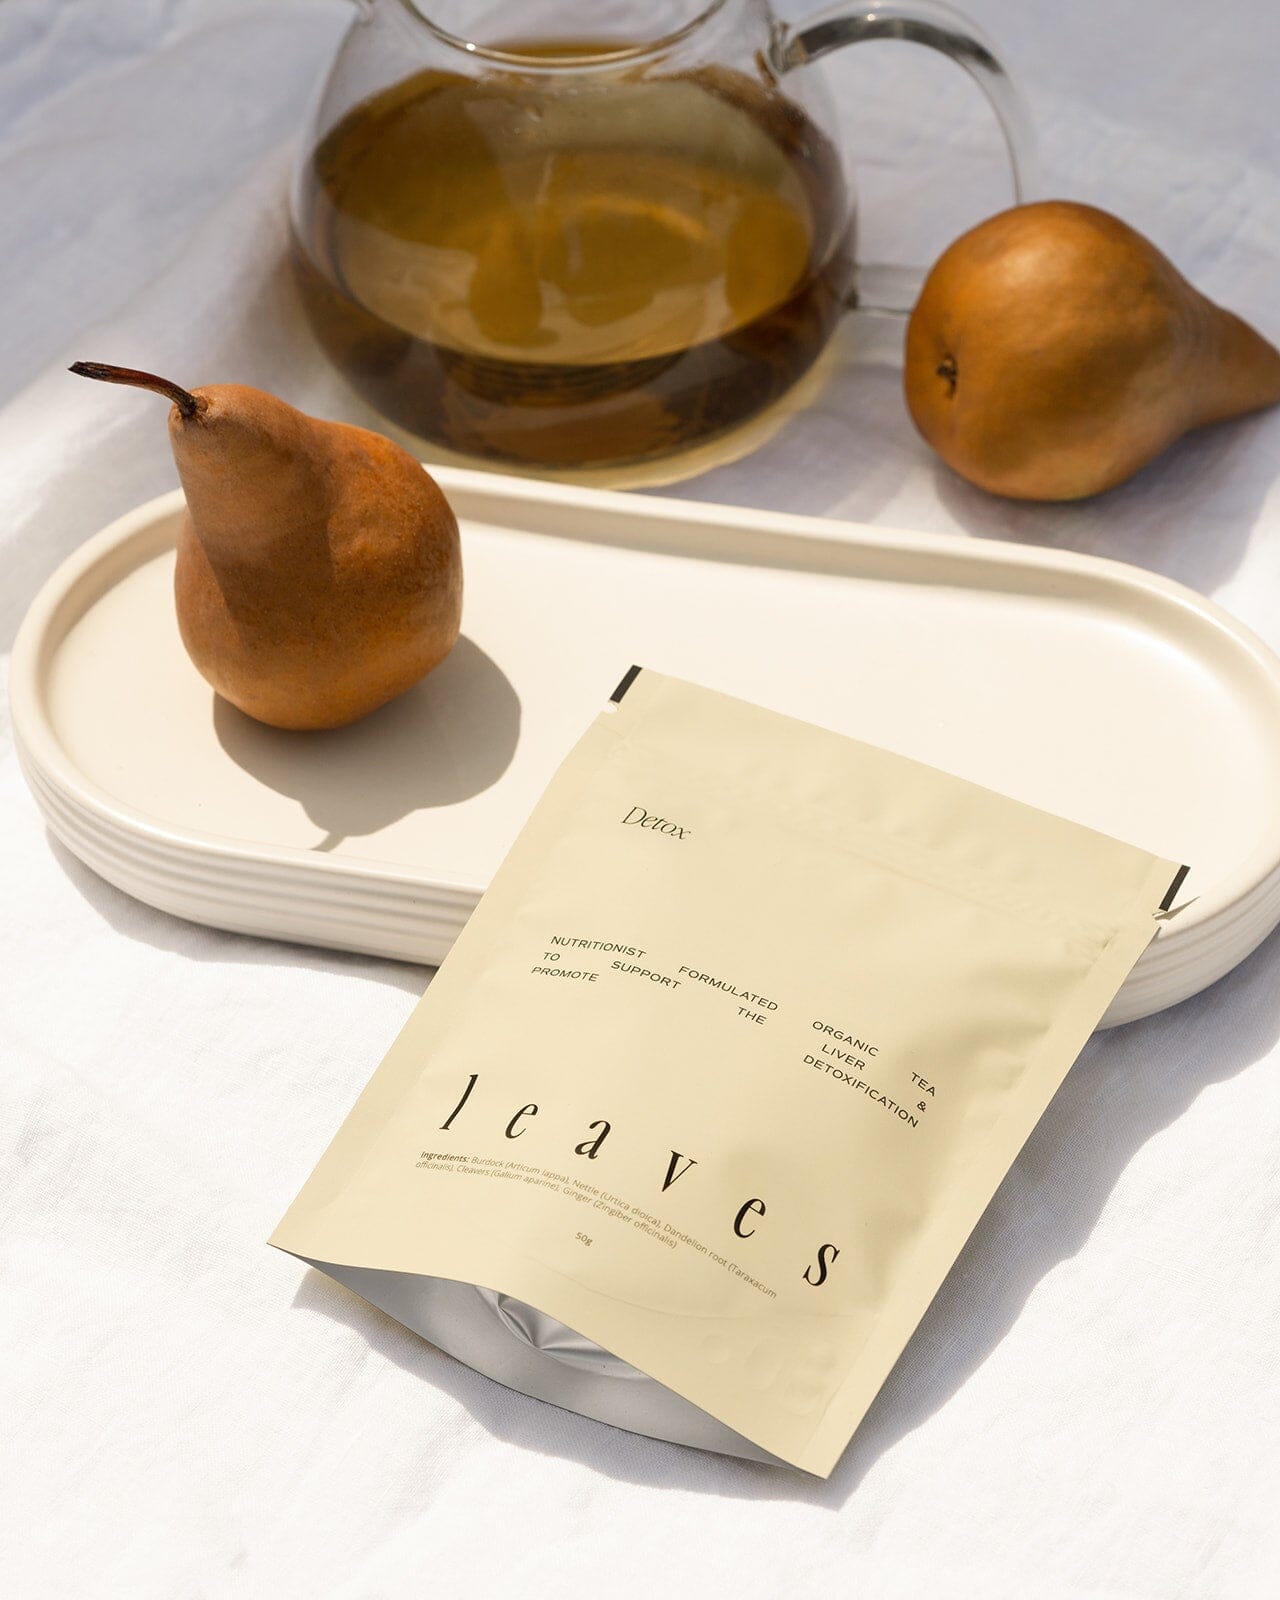 Detox tea pouch laying down next to a pear